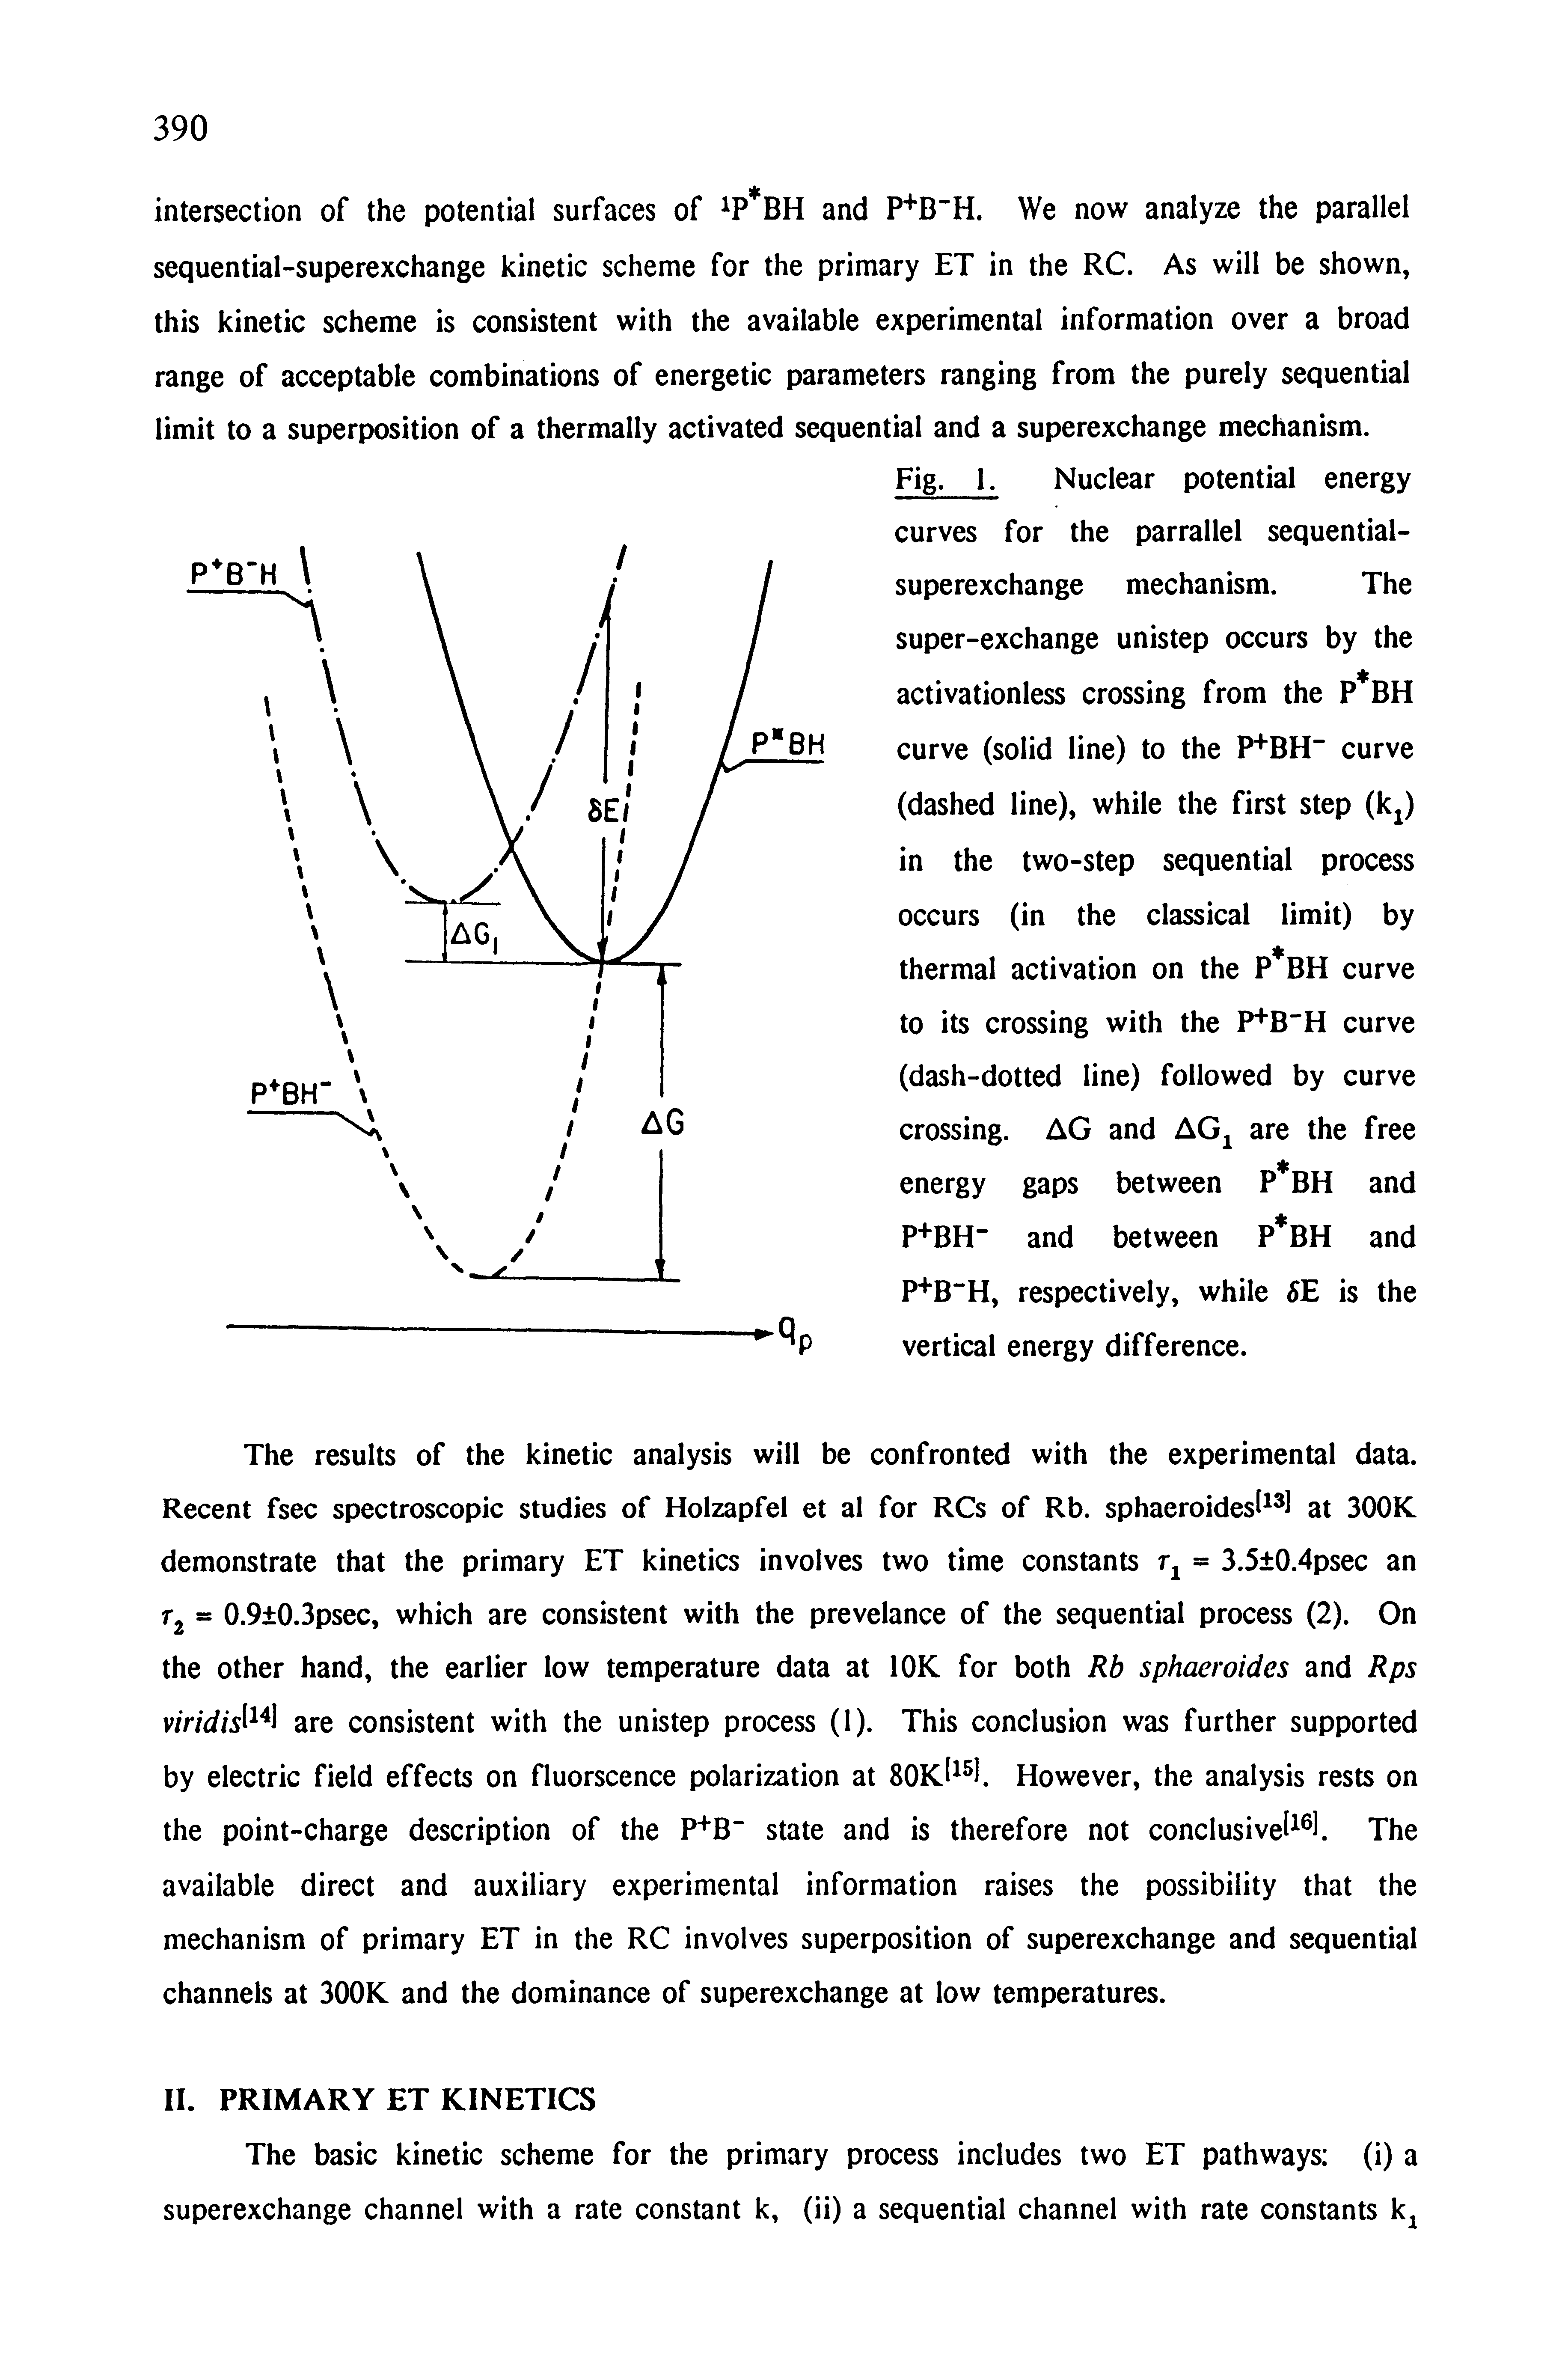 Fig. 1. Nuclear potential energy curves for the parrallel sequential-superexchange mechanism. The super-exchange unistep occurs by the activationless crossing from the P BH curve (solid line) to the P+BH" curve (dashed line), while the first step (k ) in the two-step sequential process occurs (in the classical limit) by thermal activation on the P BH curve to its crossing with the P+B"H curve (dash-dotted line) followed by curve crossing. AG and AG are the free energy gaps between P bh and P+BH" and between P BH and P B H, respectively, while 5E is the vertical energy difference.